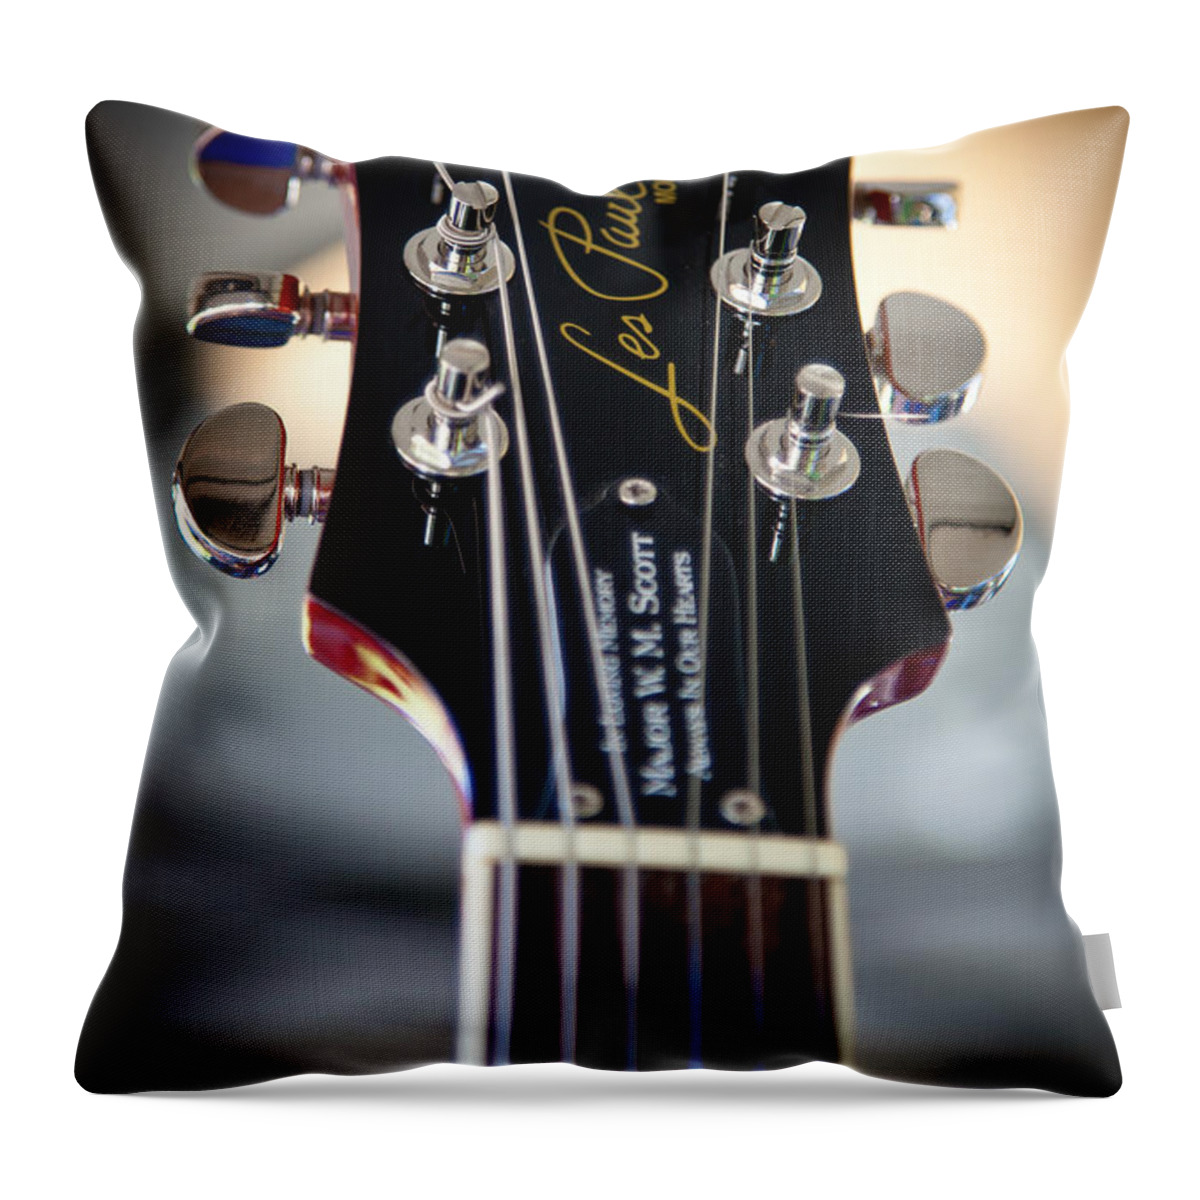 The Epiphone Les Paul Guitars Throw Pillow featuring the photograph The Epiphone Les Paul Guitar by David Patterson